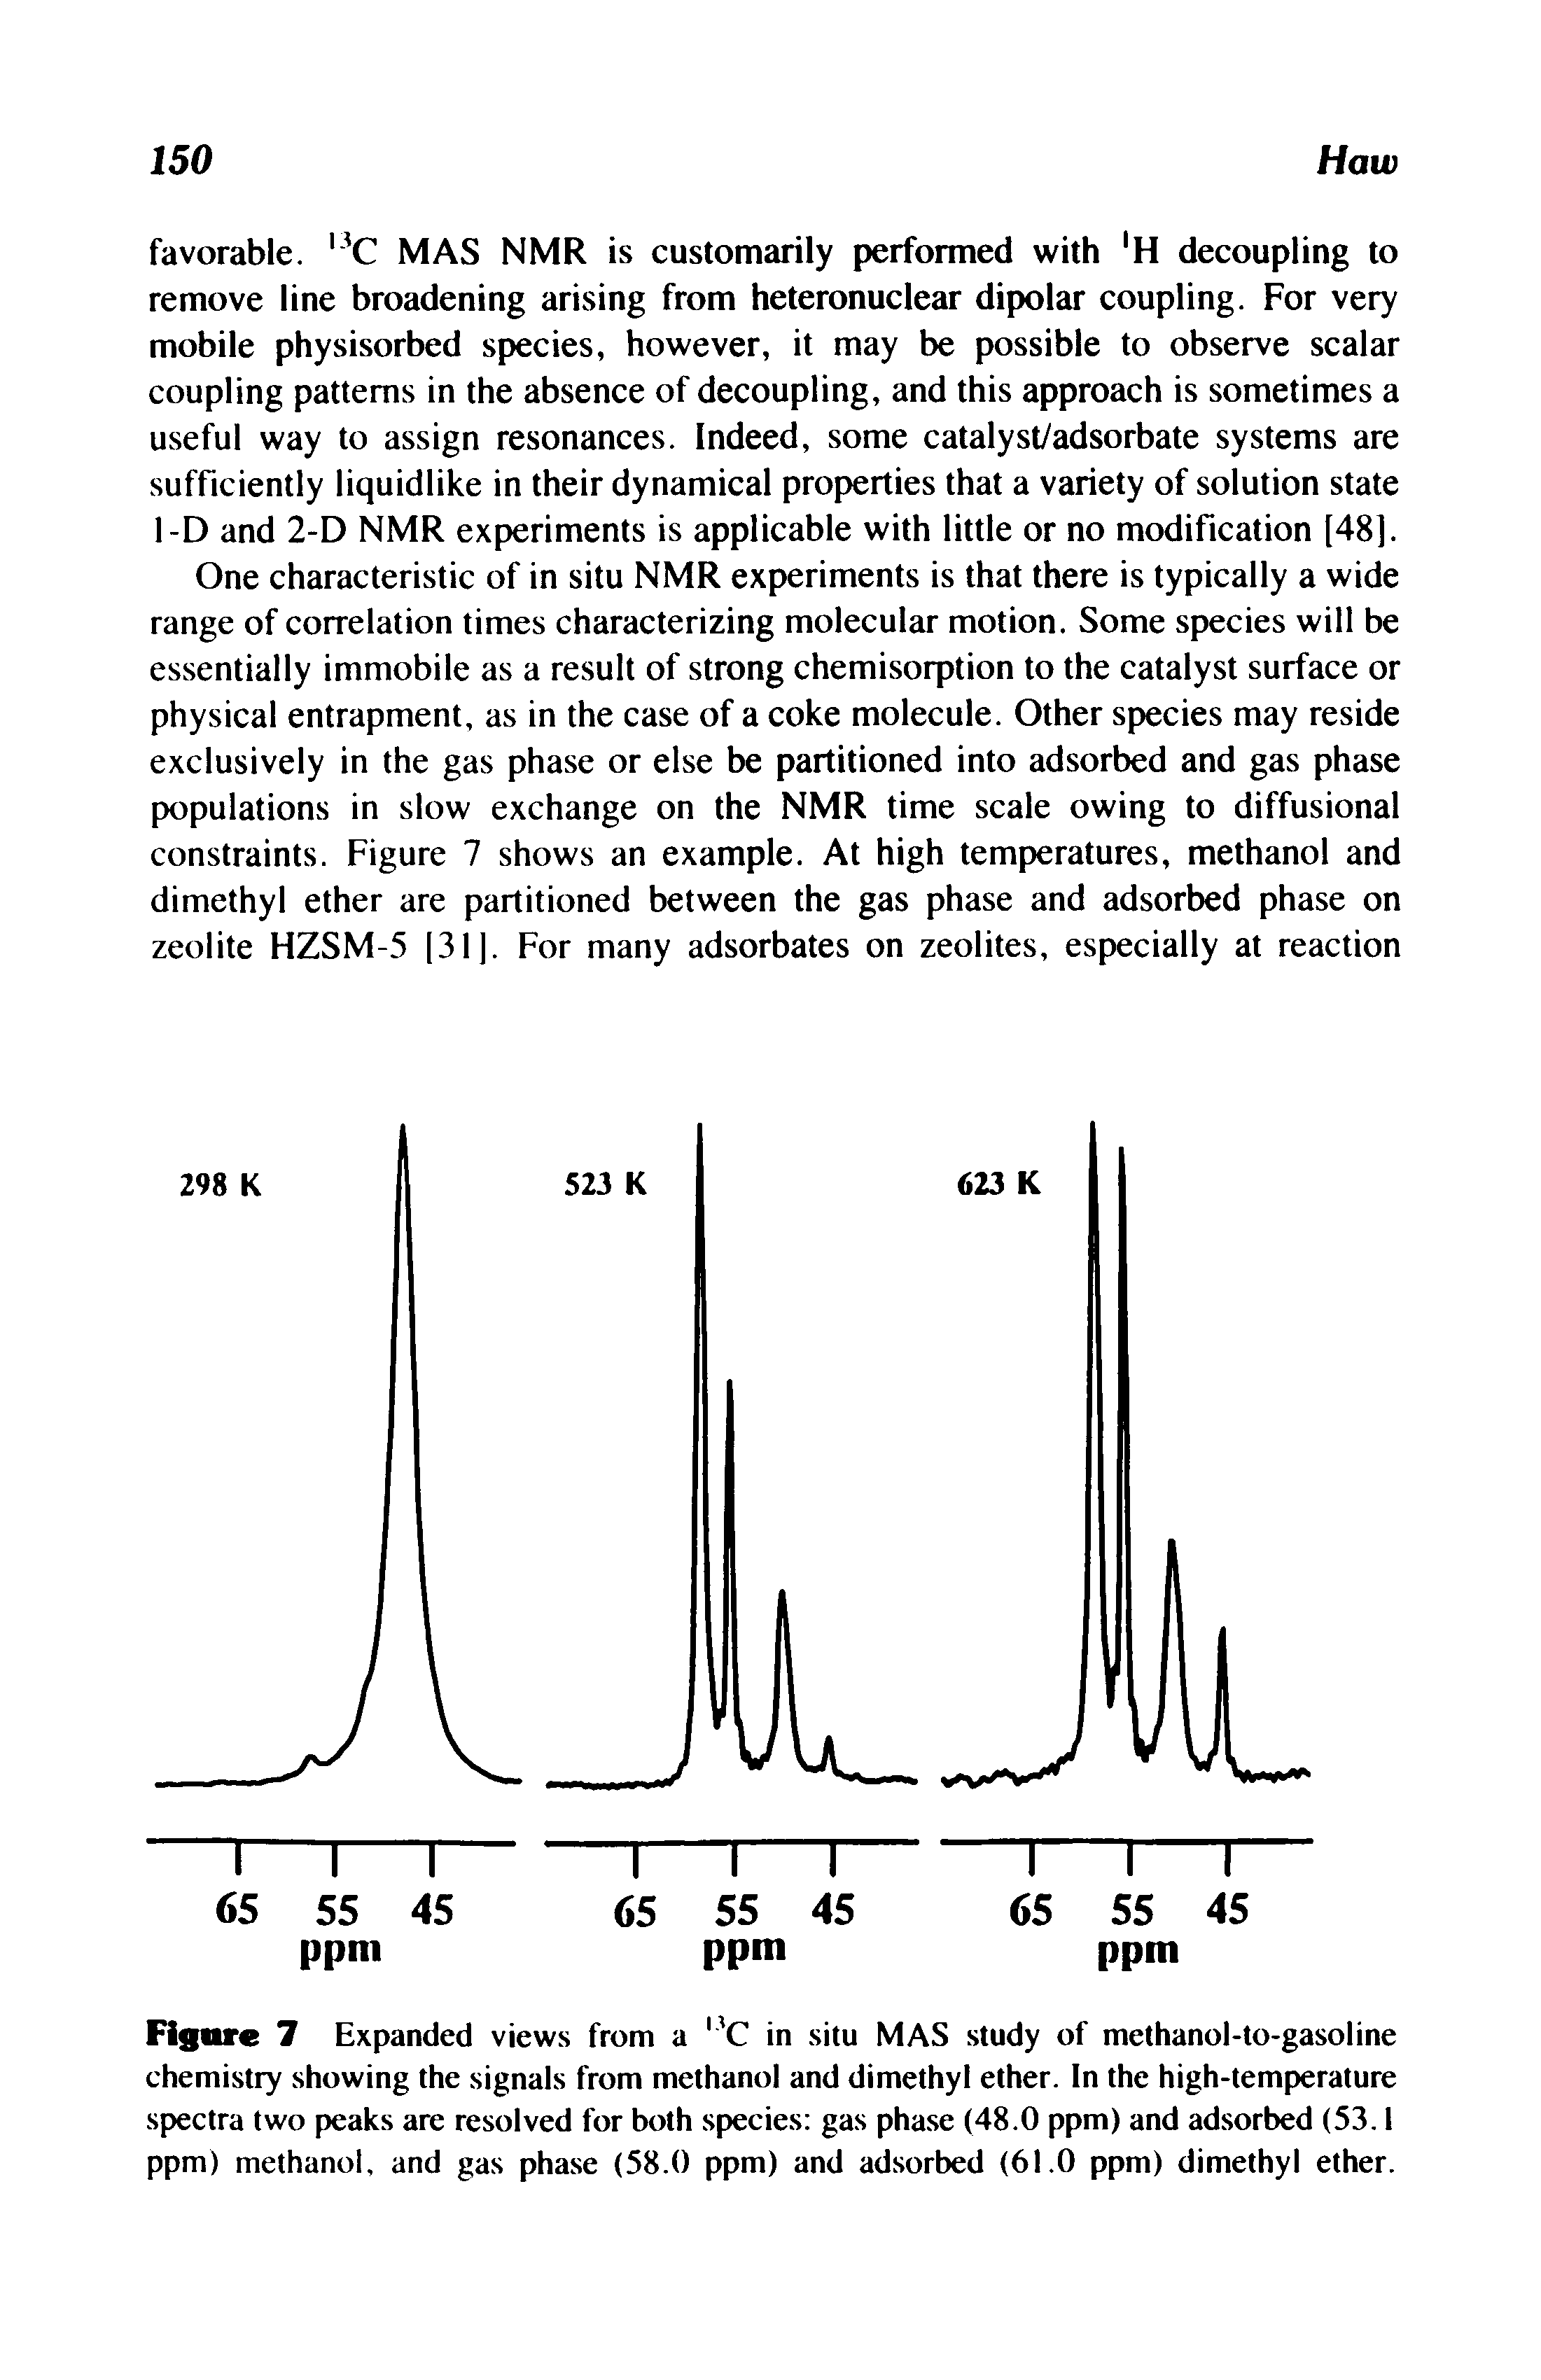 Figure 7 Expanded views from a C in situ MAS study of methanol-to-gasoline chemistry showing the signals from methanol and dimethyl ether. In the high-temperature spectra two peaks are resolved for both species gas phase (48.0 ppm) and adsorbed (53.1 ppm) methanol, and gas phase (58.0 ppm) and adsorbed (61.0 ppm) dimethyl ether.